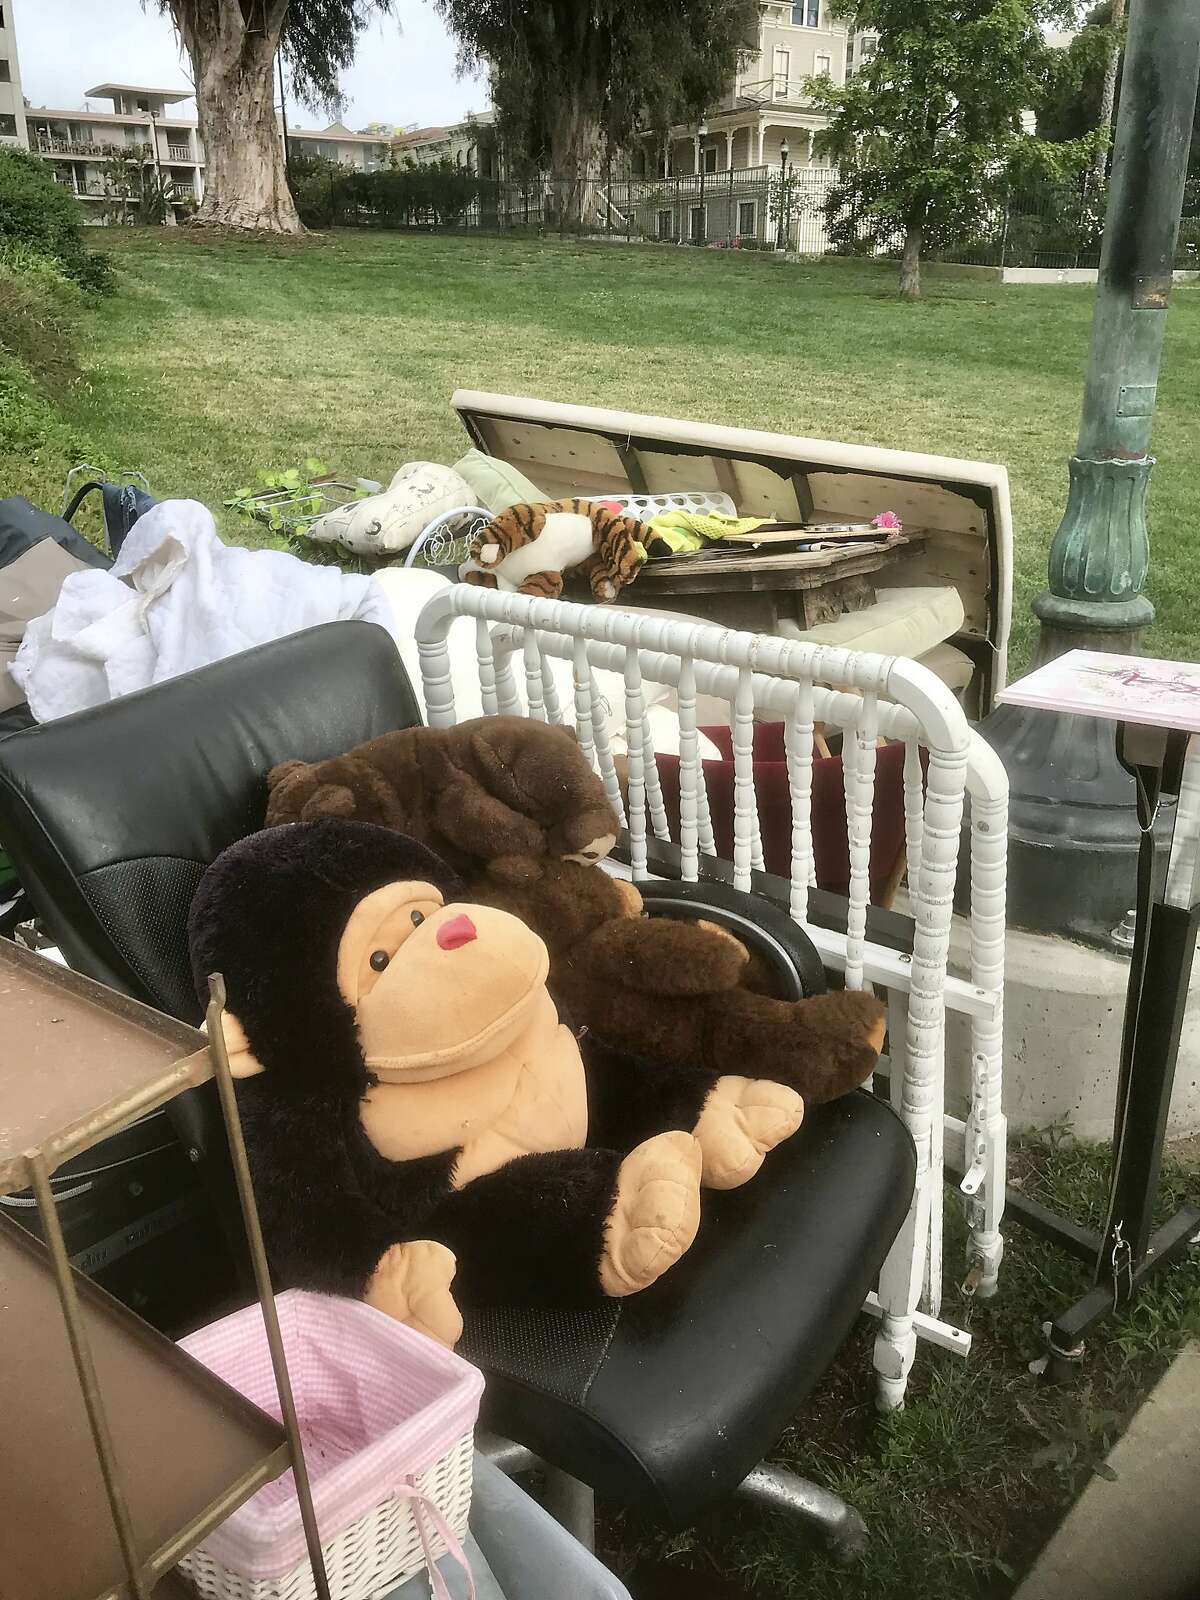 A stuff animal sits amid personal belongings left by homeless at Lake Merritt in Oakland. The city was clearing the park Wednesday ahead of Oakland hosting its fourth consecutive NBA championship.